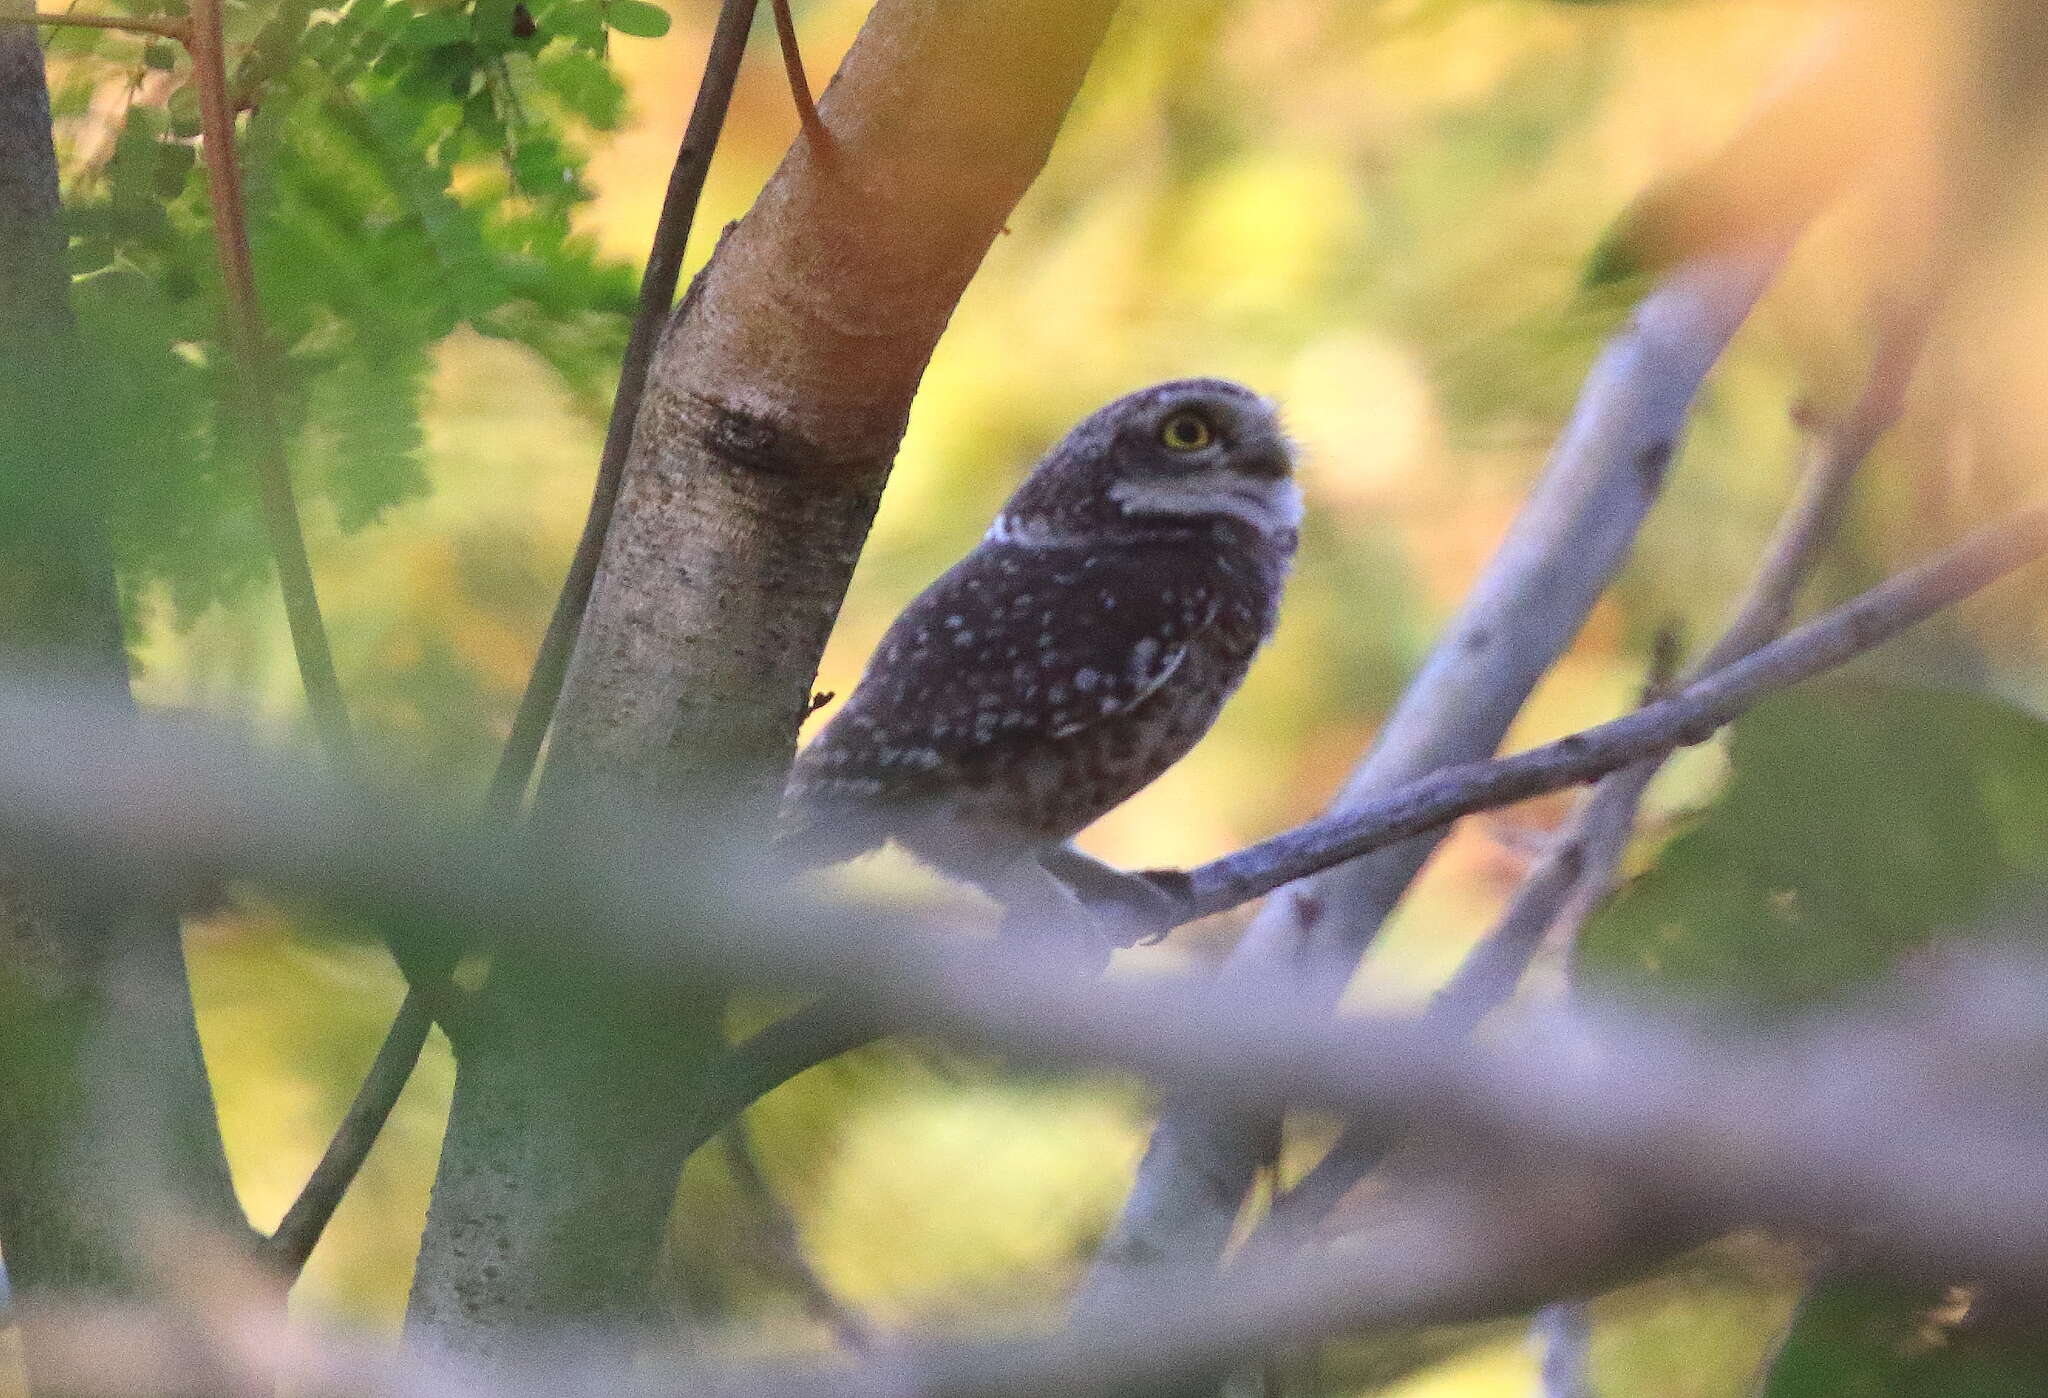 Image of Spotted Owlet